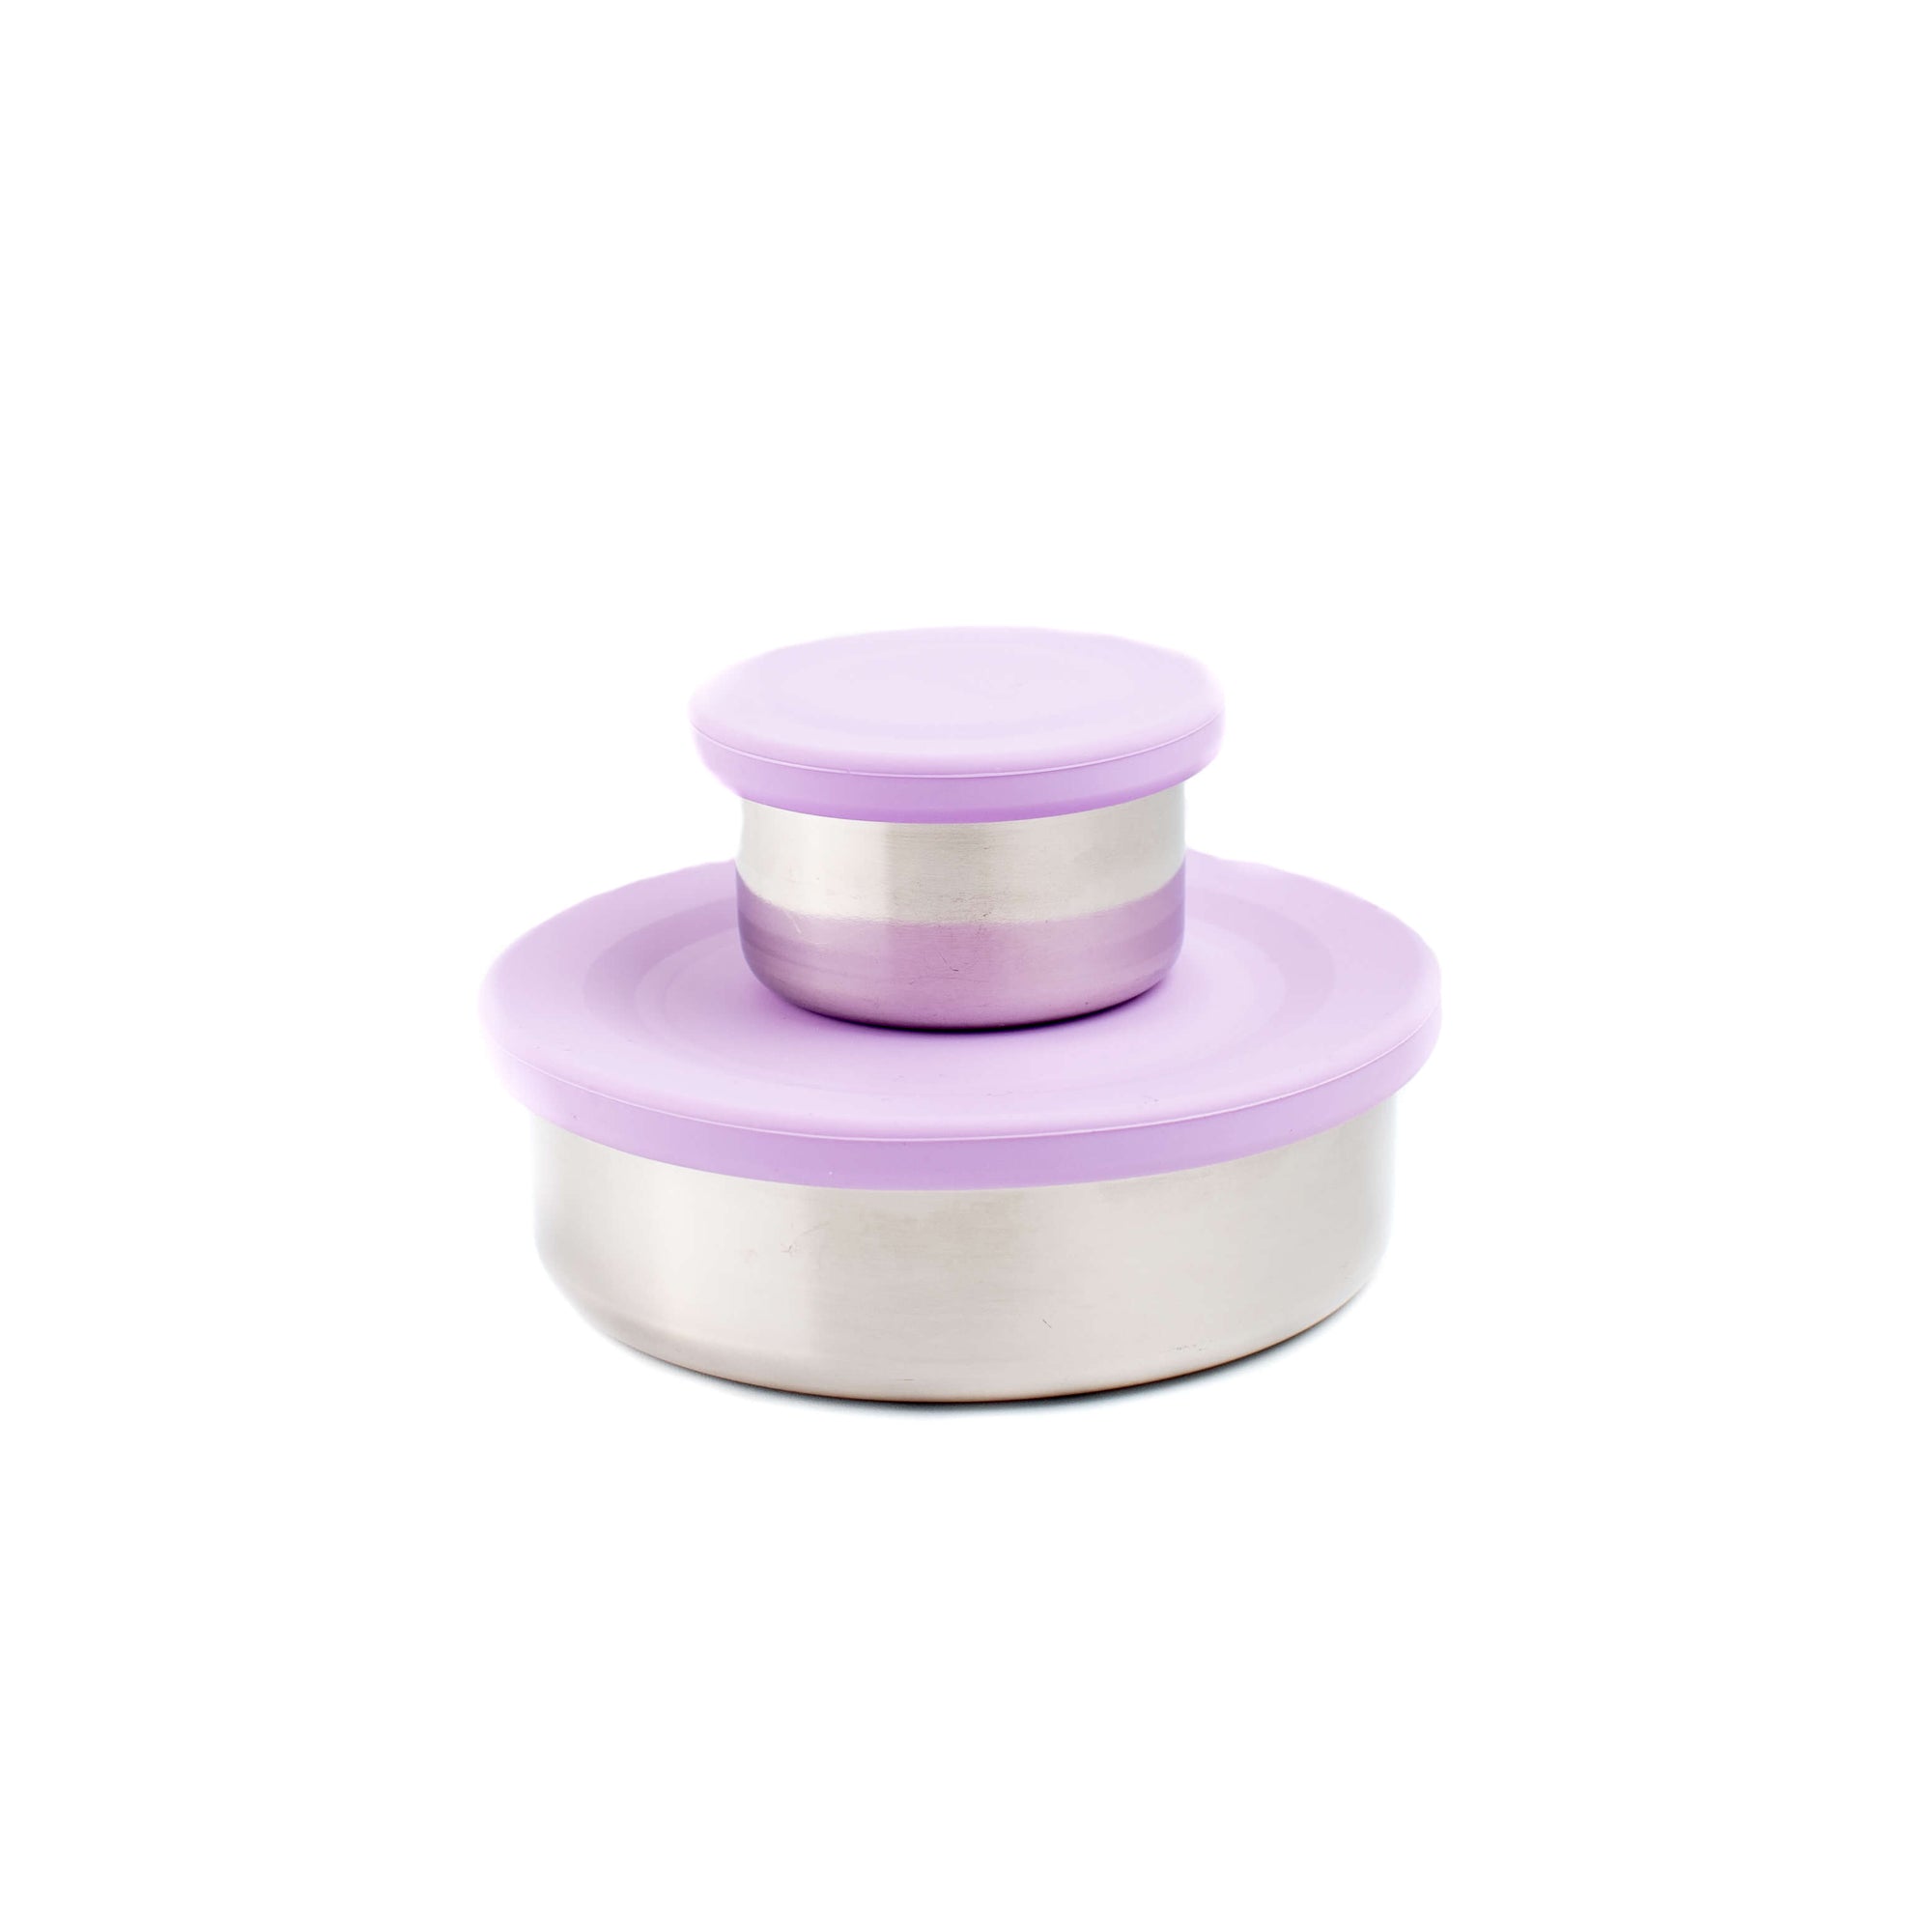 Ecococoon Stainless Steel Snack Pots - Grape